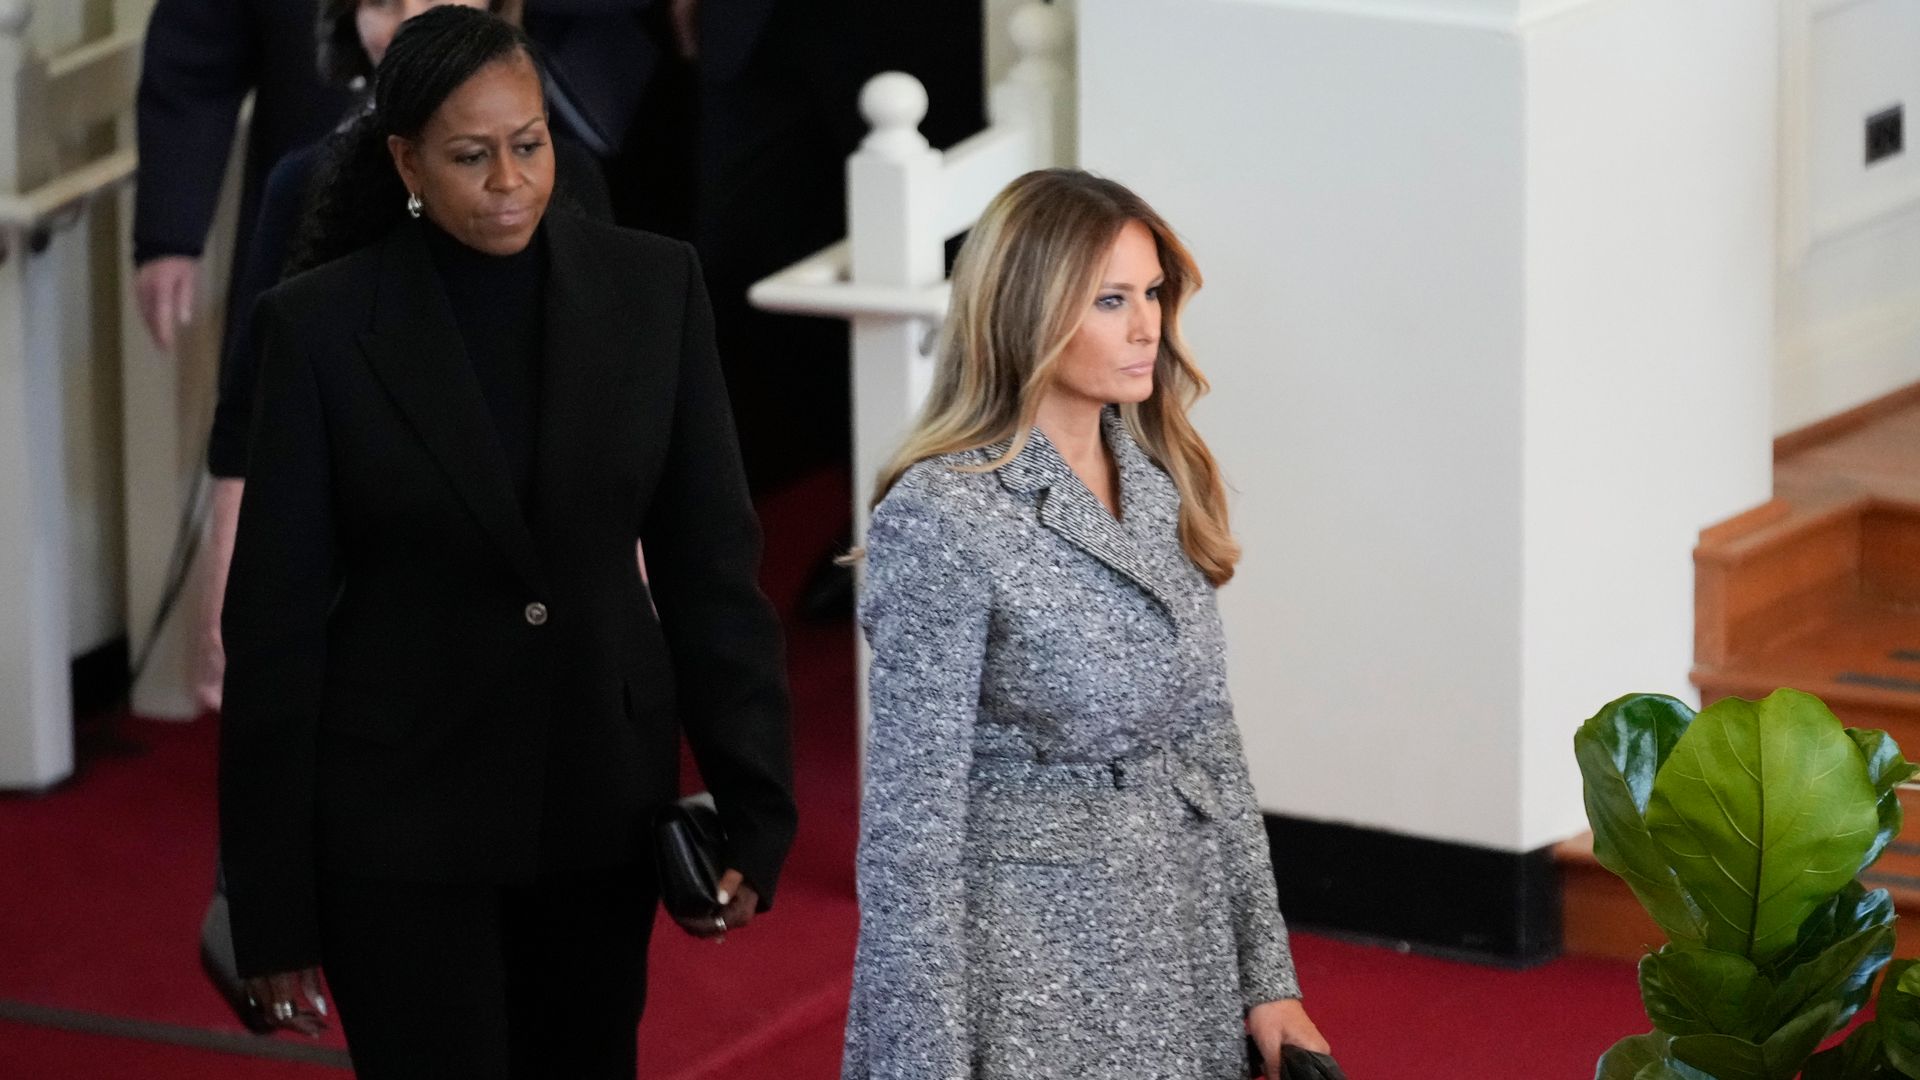 Melania Trump wore gray to Rosalynn Carter's funeral. Her disregard for tradition could empower other women to reconsider some rules.